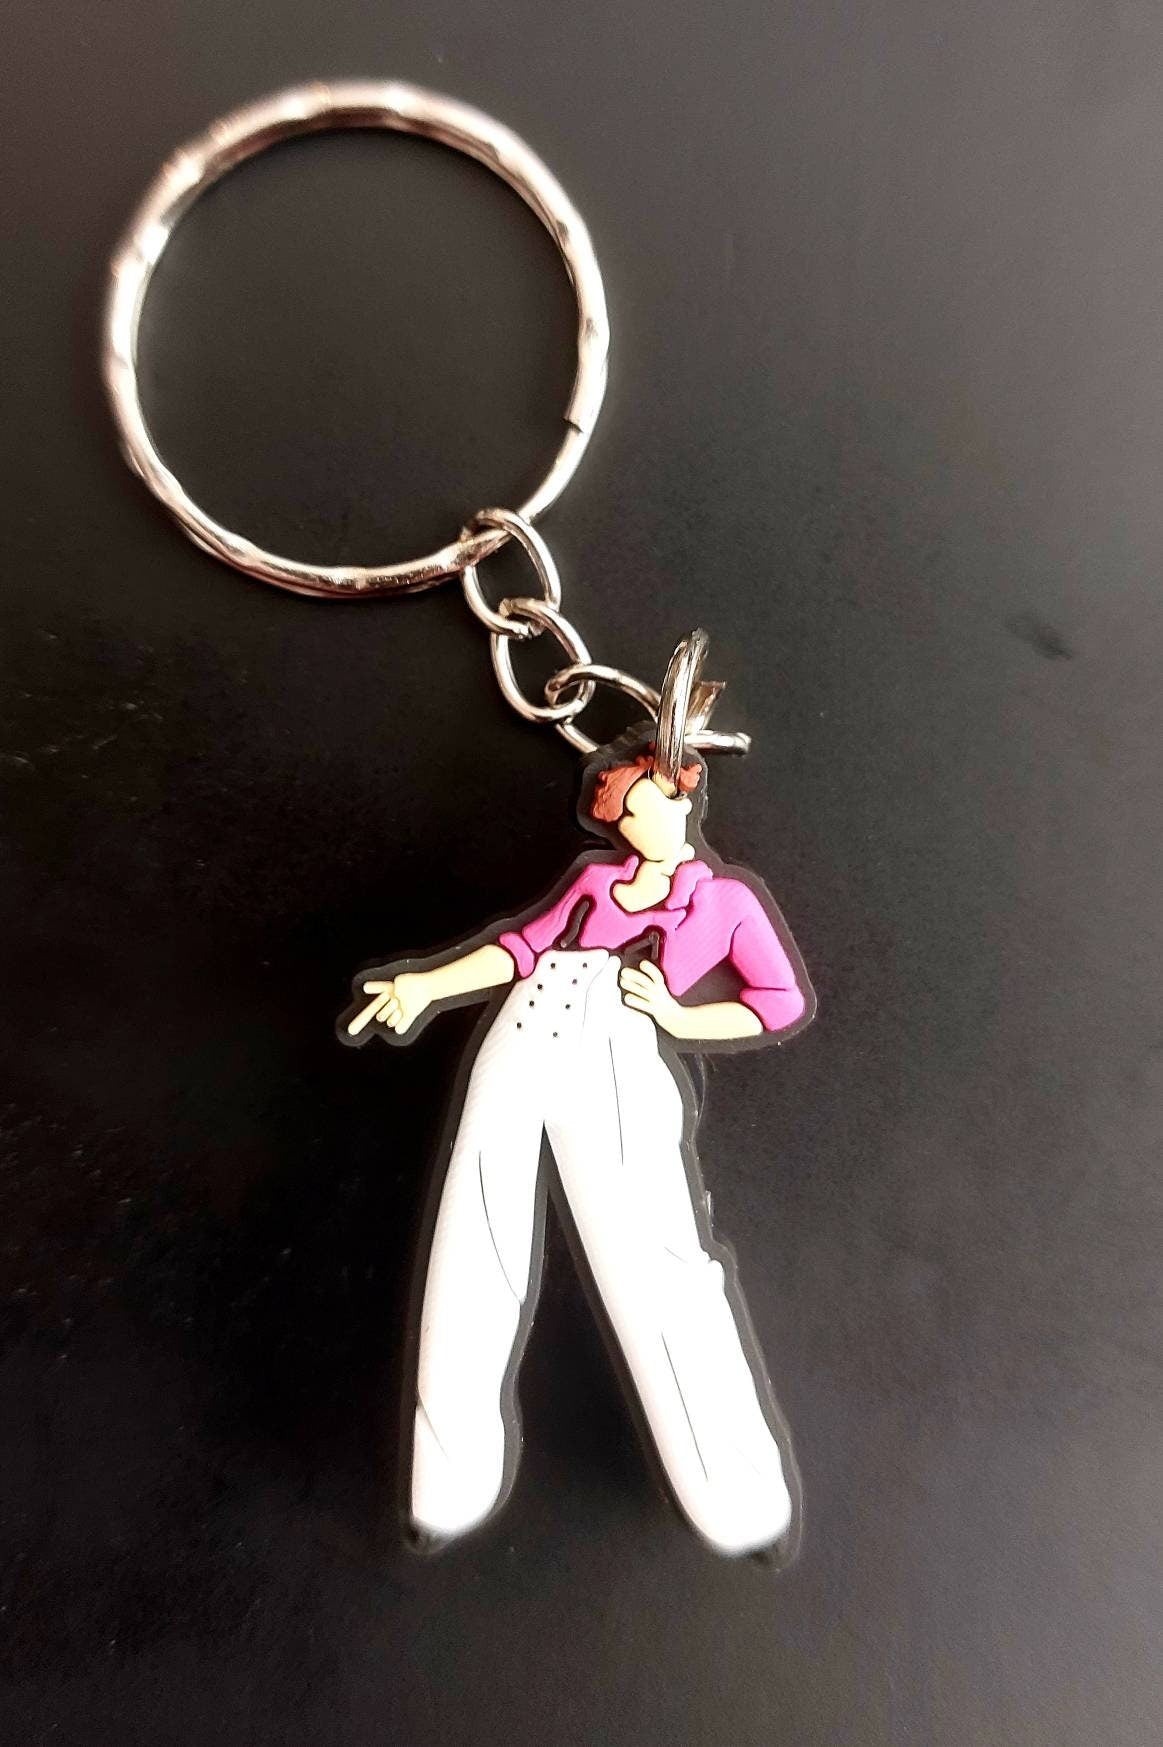 HARRY STYLES Keyring Keychain | gifts for music lovers, quirky gifts, gifts for her, tpwk, as it was